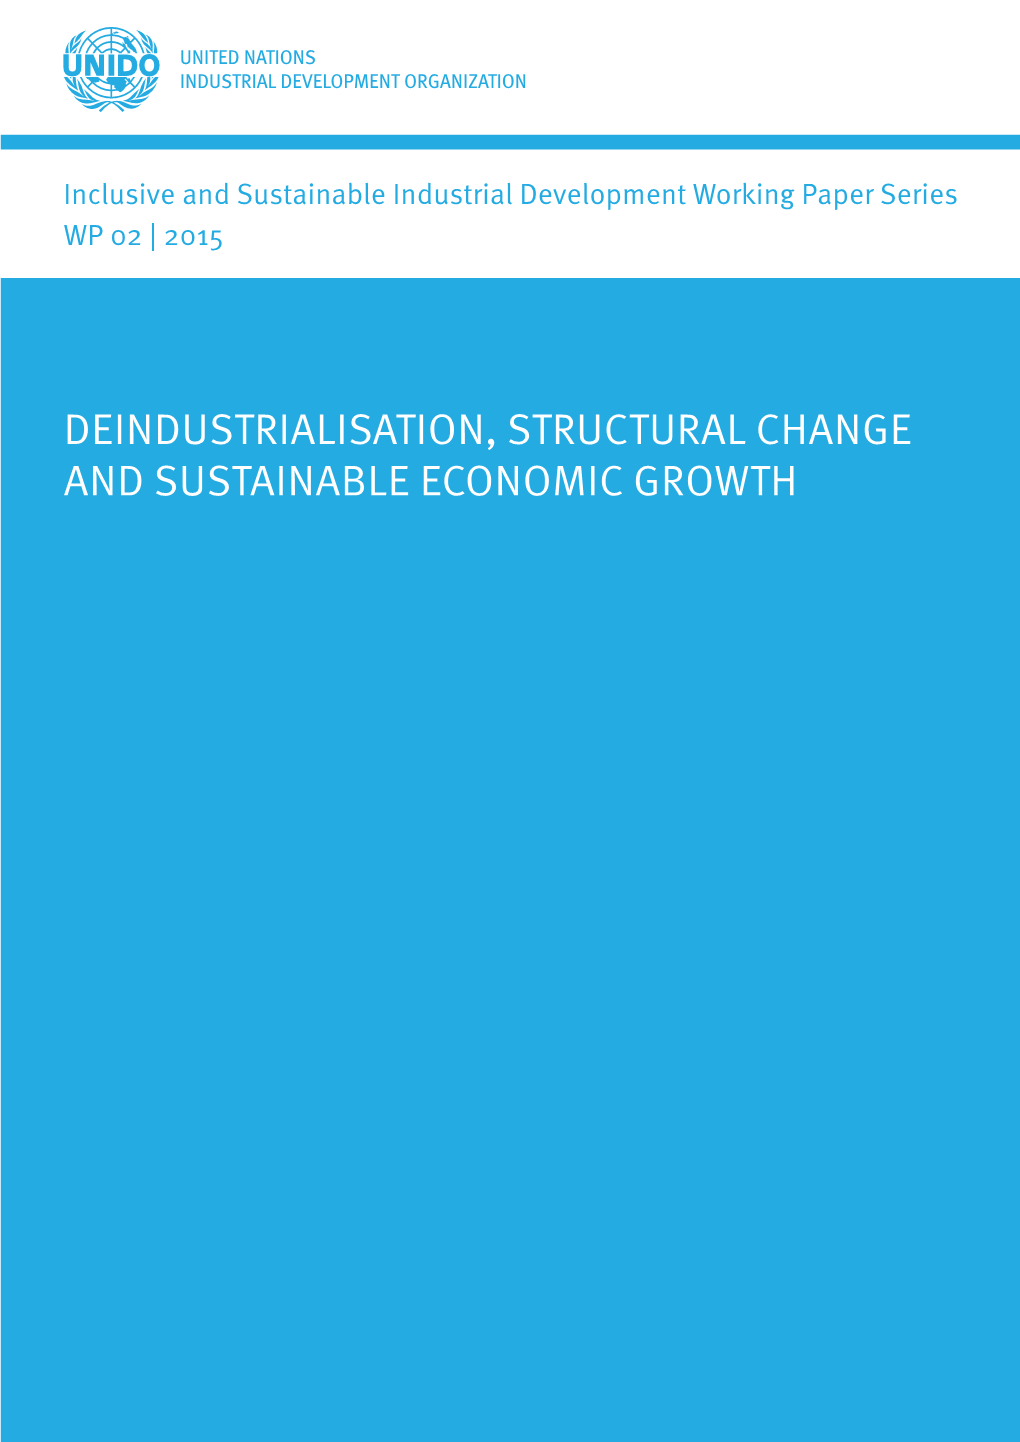 Deindustrialisation, Structural Change and Sustainable Economic Growth.Pdf